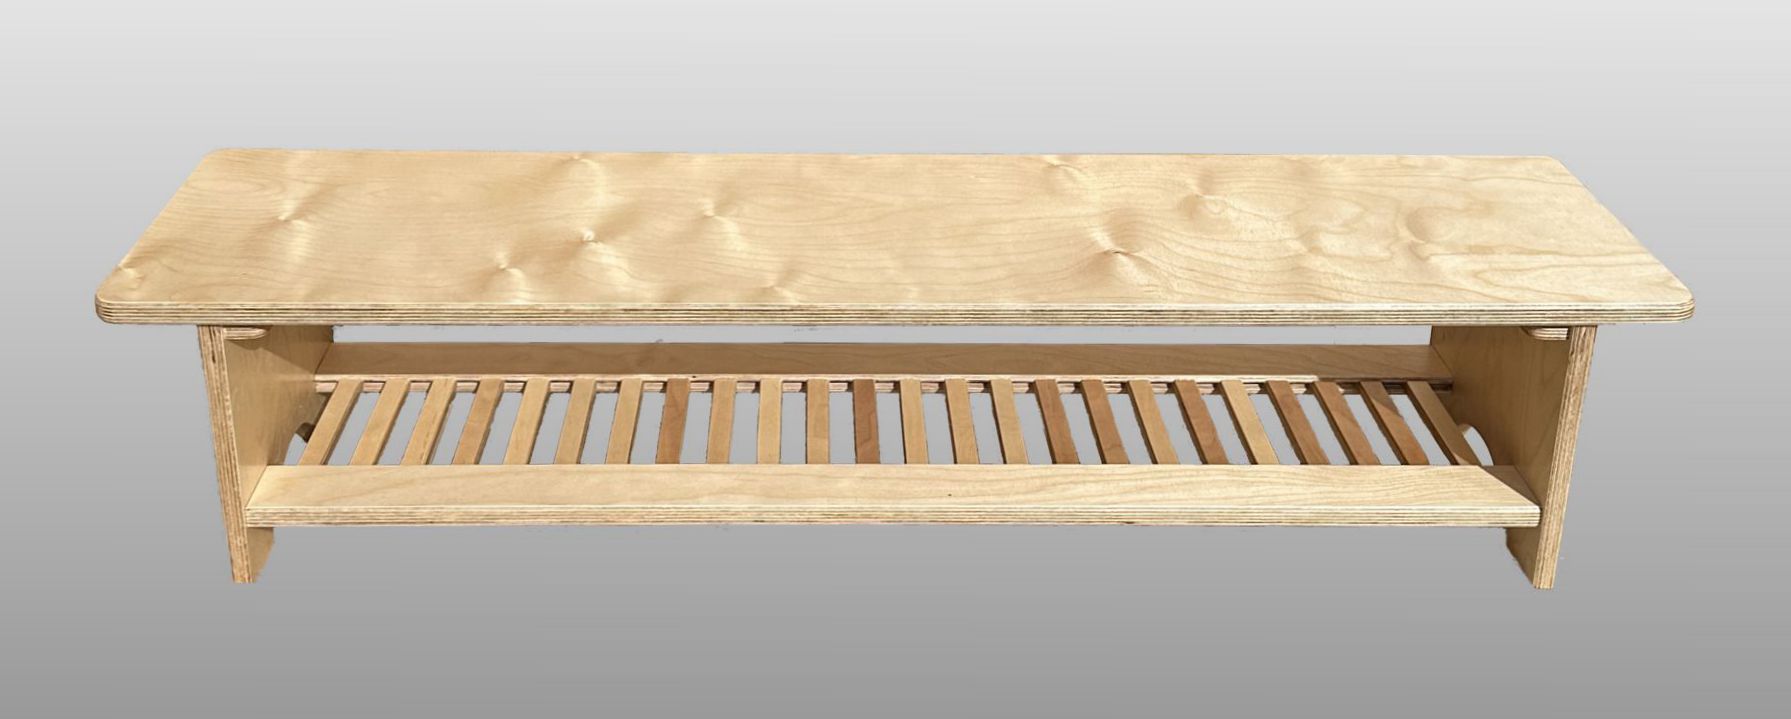 Bench for nursery